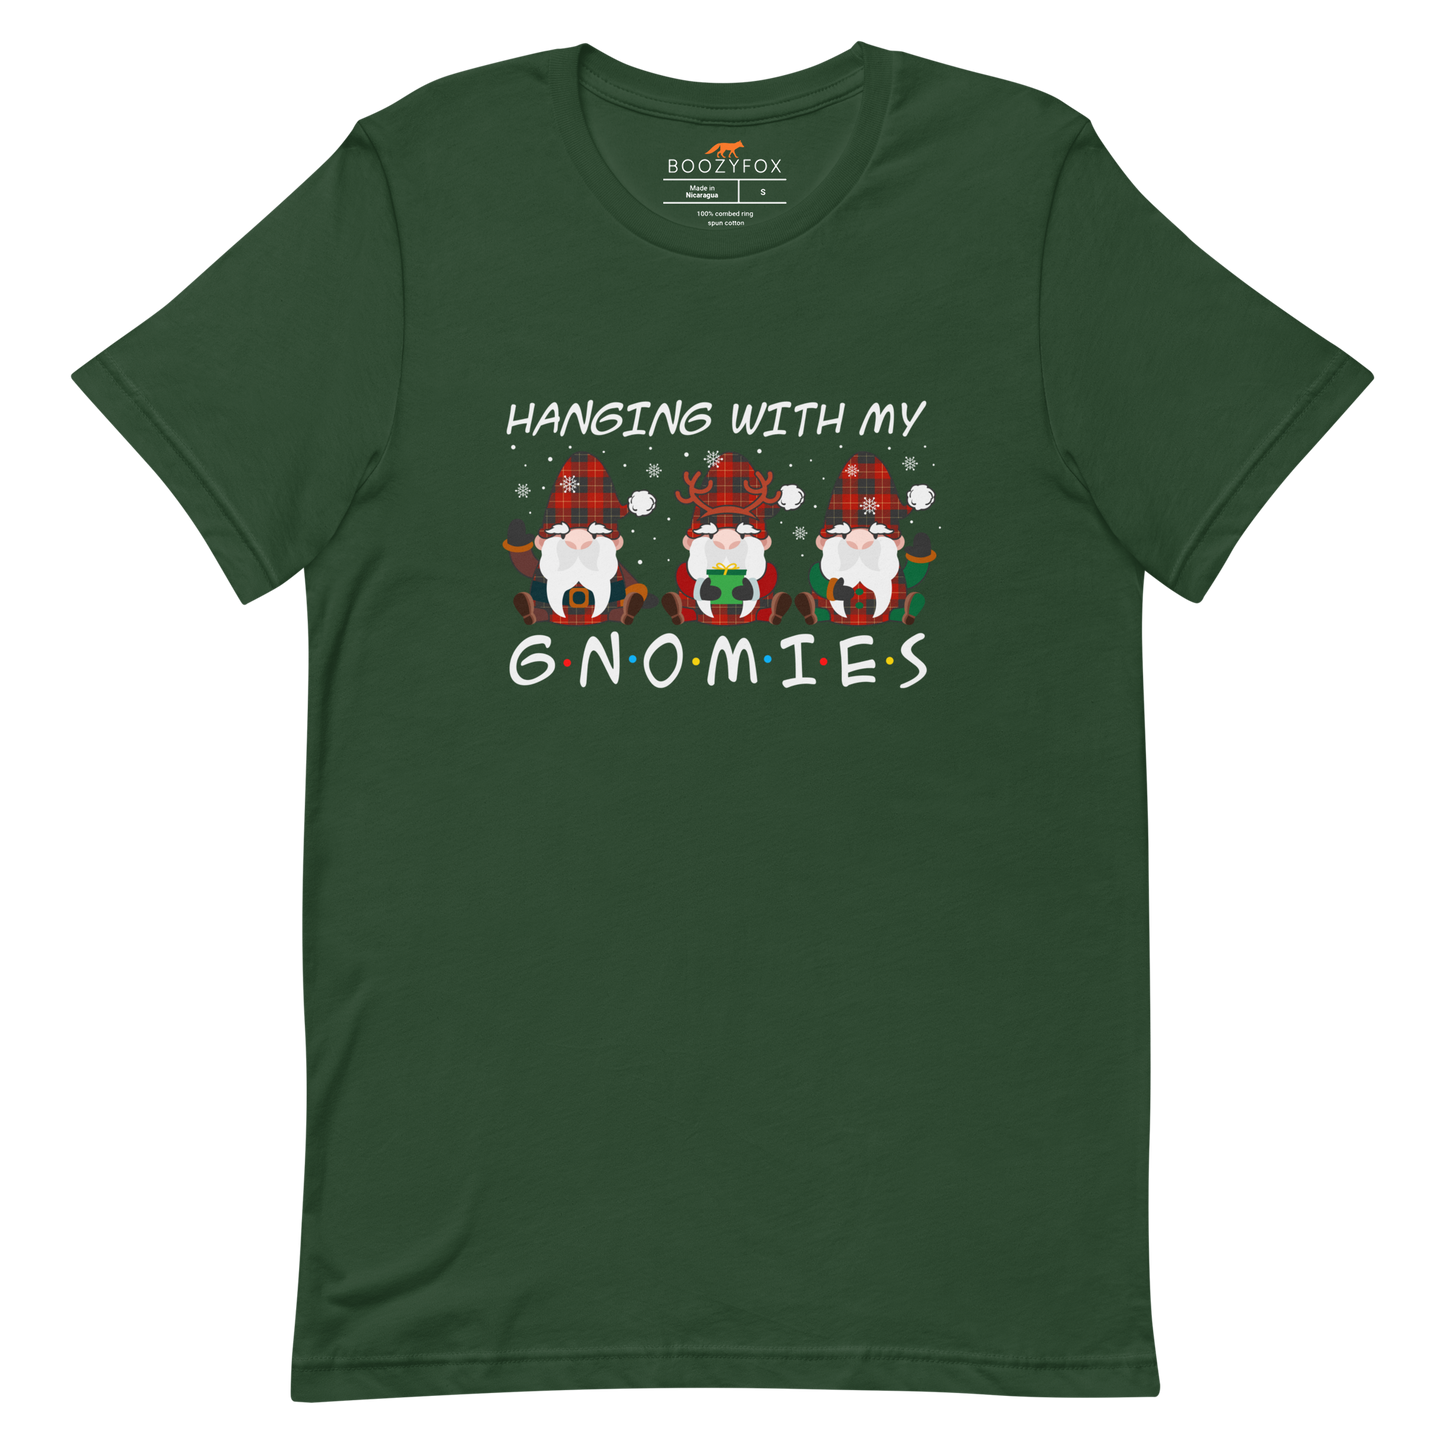 Forest Green Premium Christmas Gnome Tee featuring a delight Hanging With My Gnomies graphic on the chest - Funny Christmas Graphic Gnome Tees - Boozy Fox